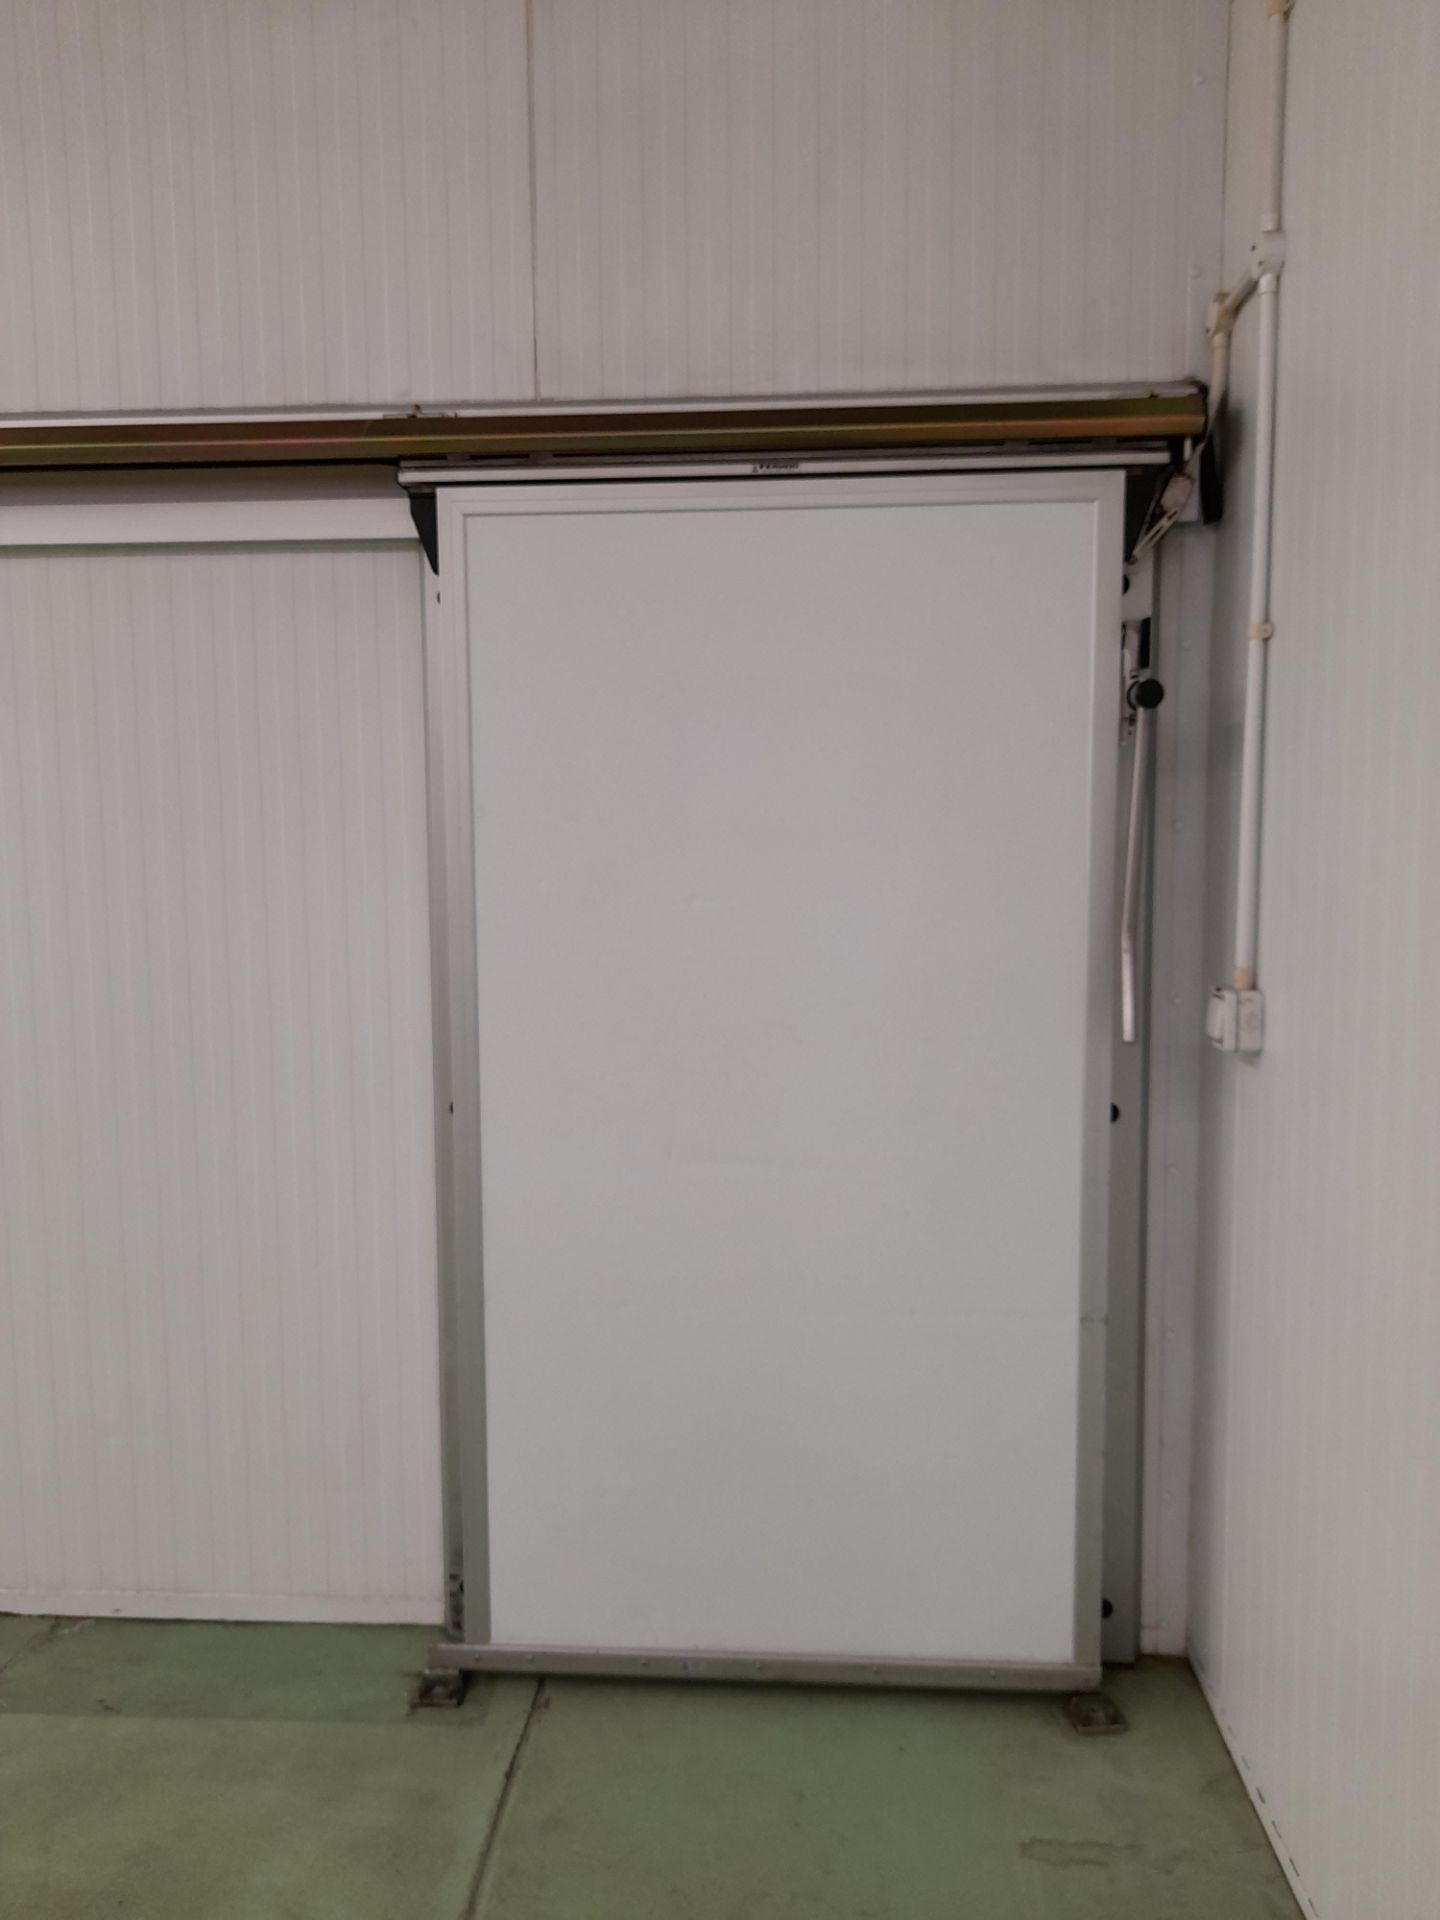 Twin Modular Fabricated Chill Room – Room 6 approx. 8m x 4.5m with 1 x Russell 3 fan chiller, Room 7 - Image 4 of 5